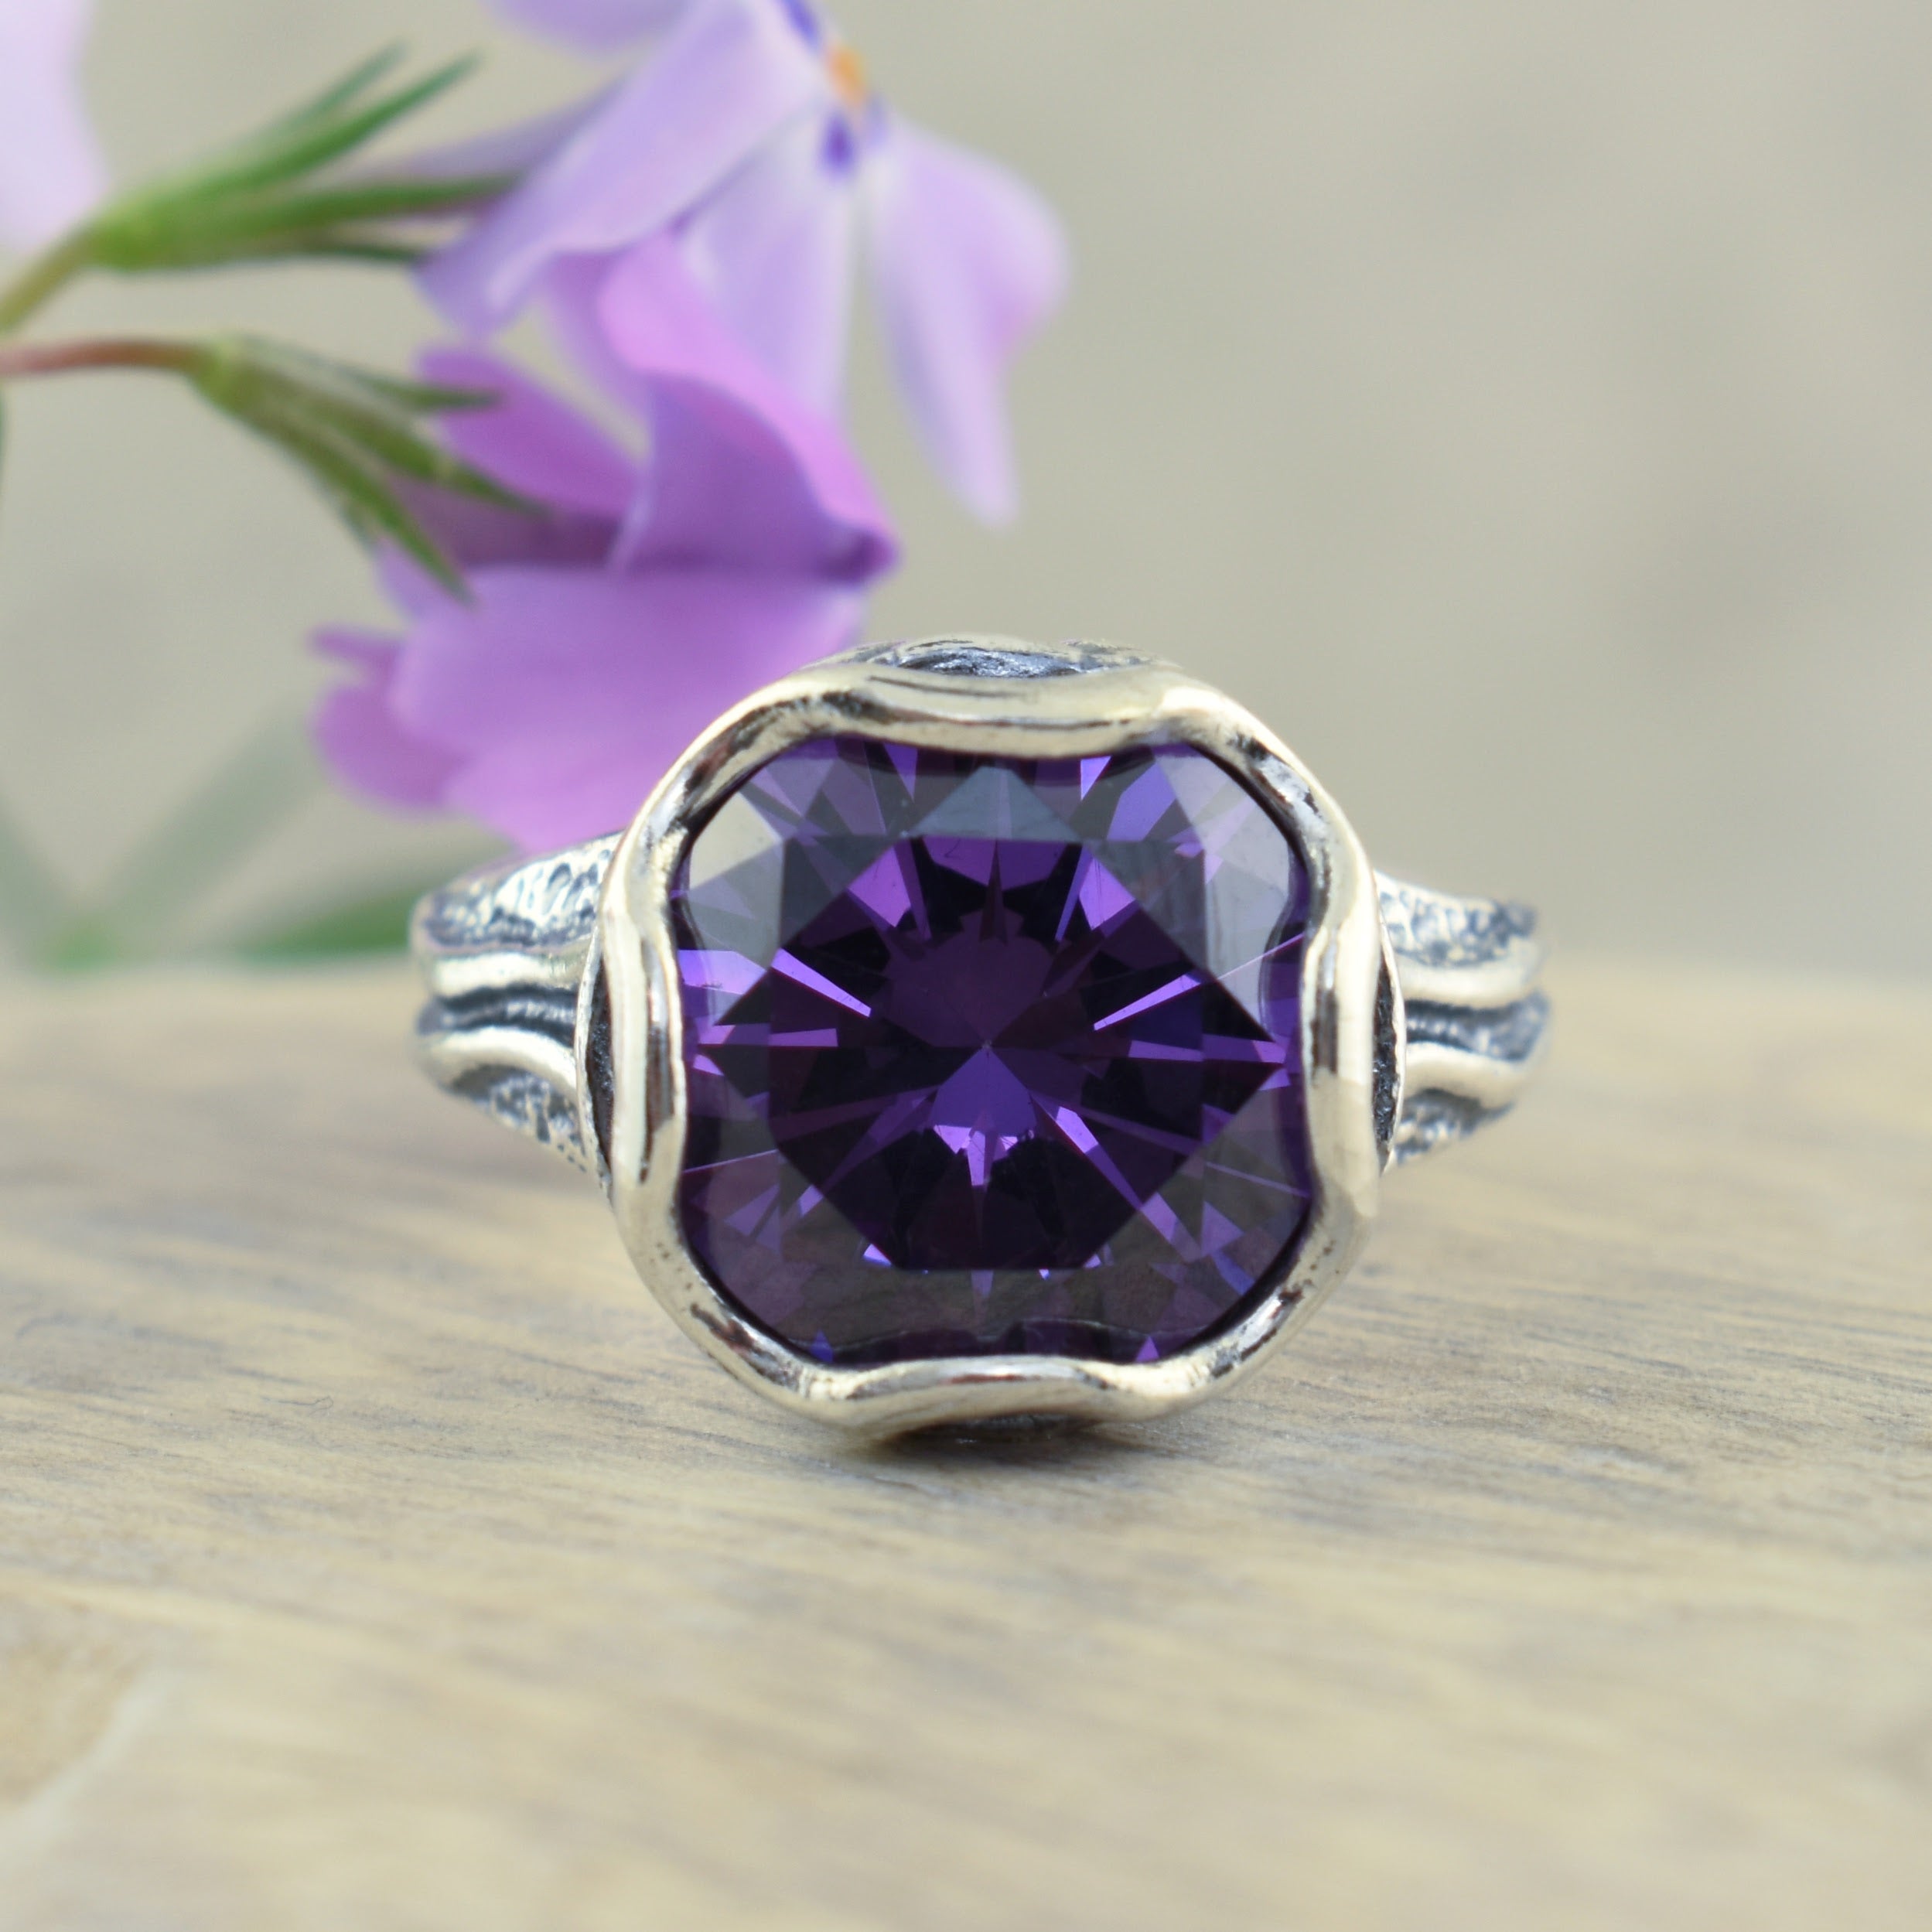 Amethyst cubic zirconia stone with sterling silver setting